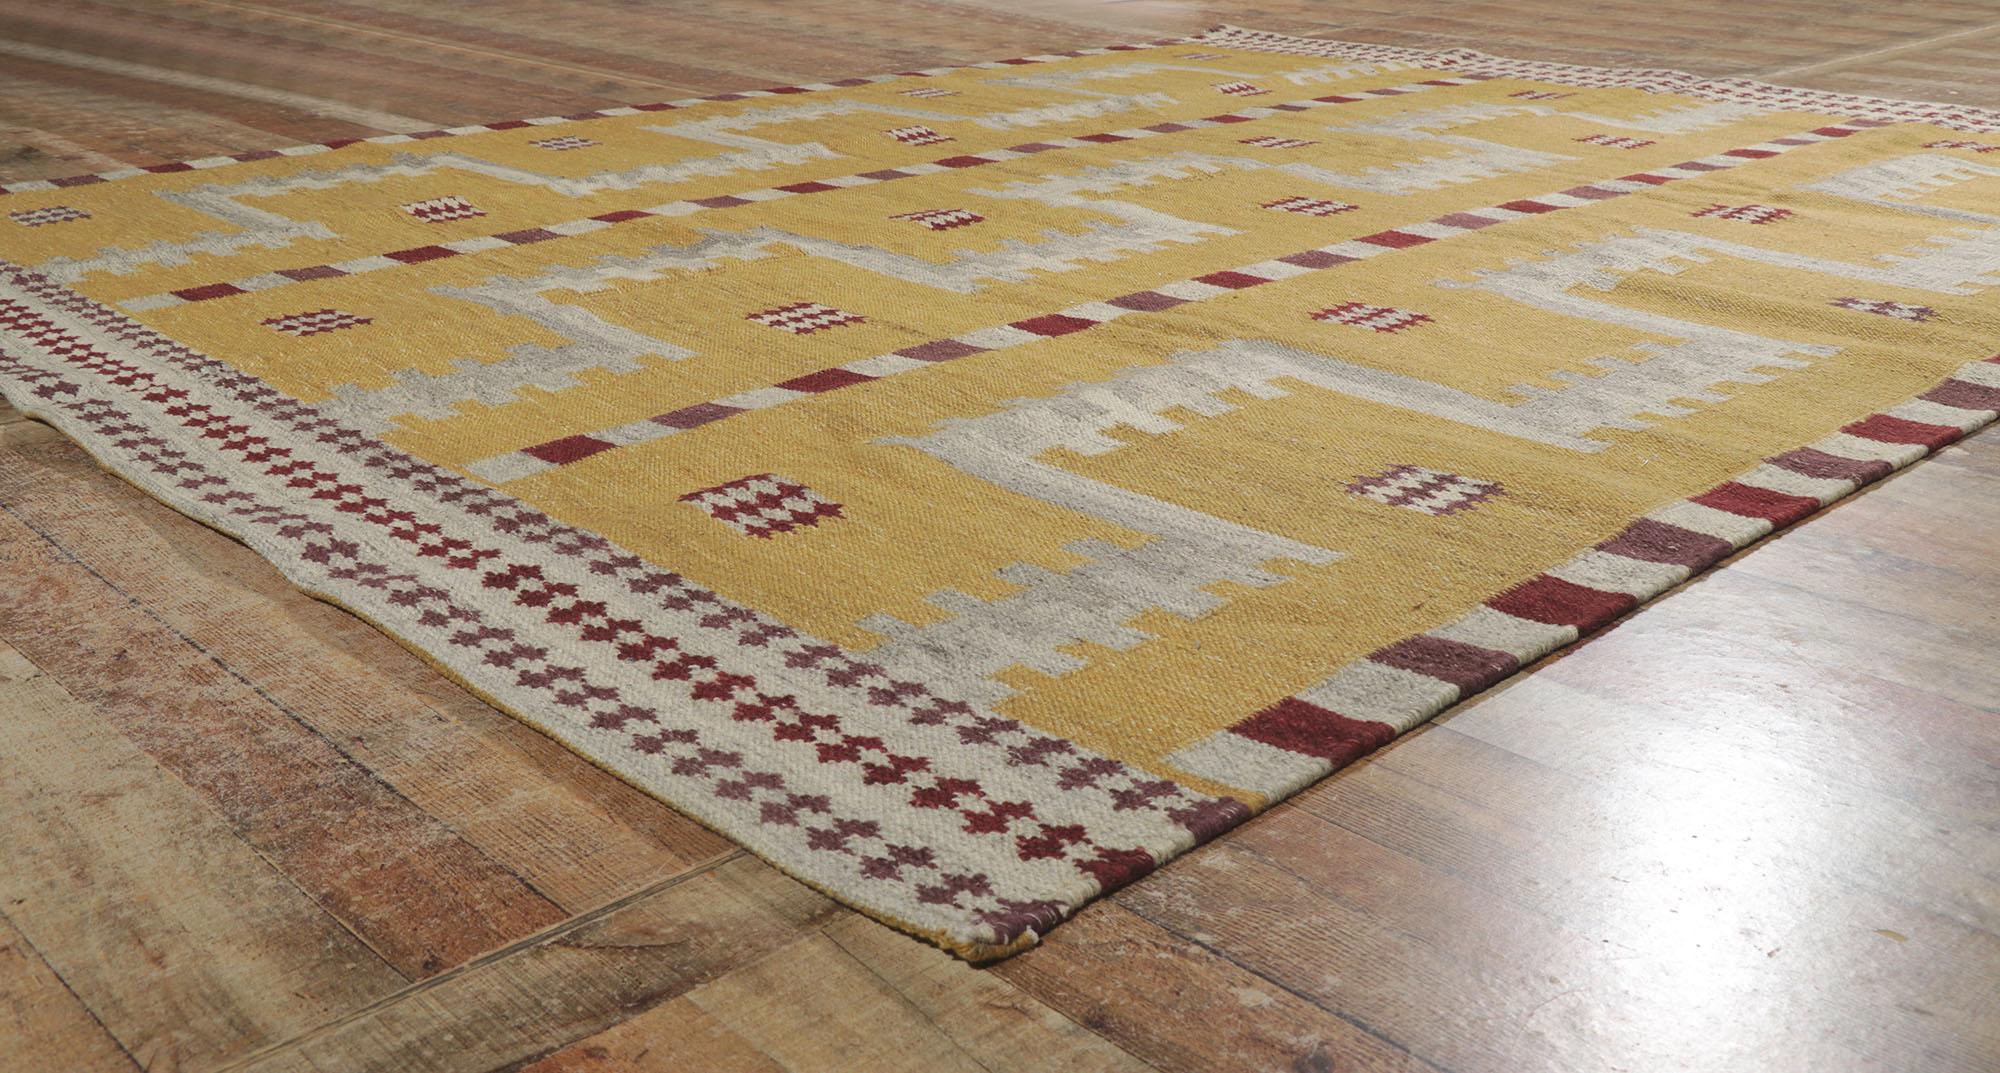 Contemporary Swedish Inspired Kilim Rug, Scandinavian Modern Meets Cubist Style For Sale